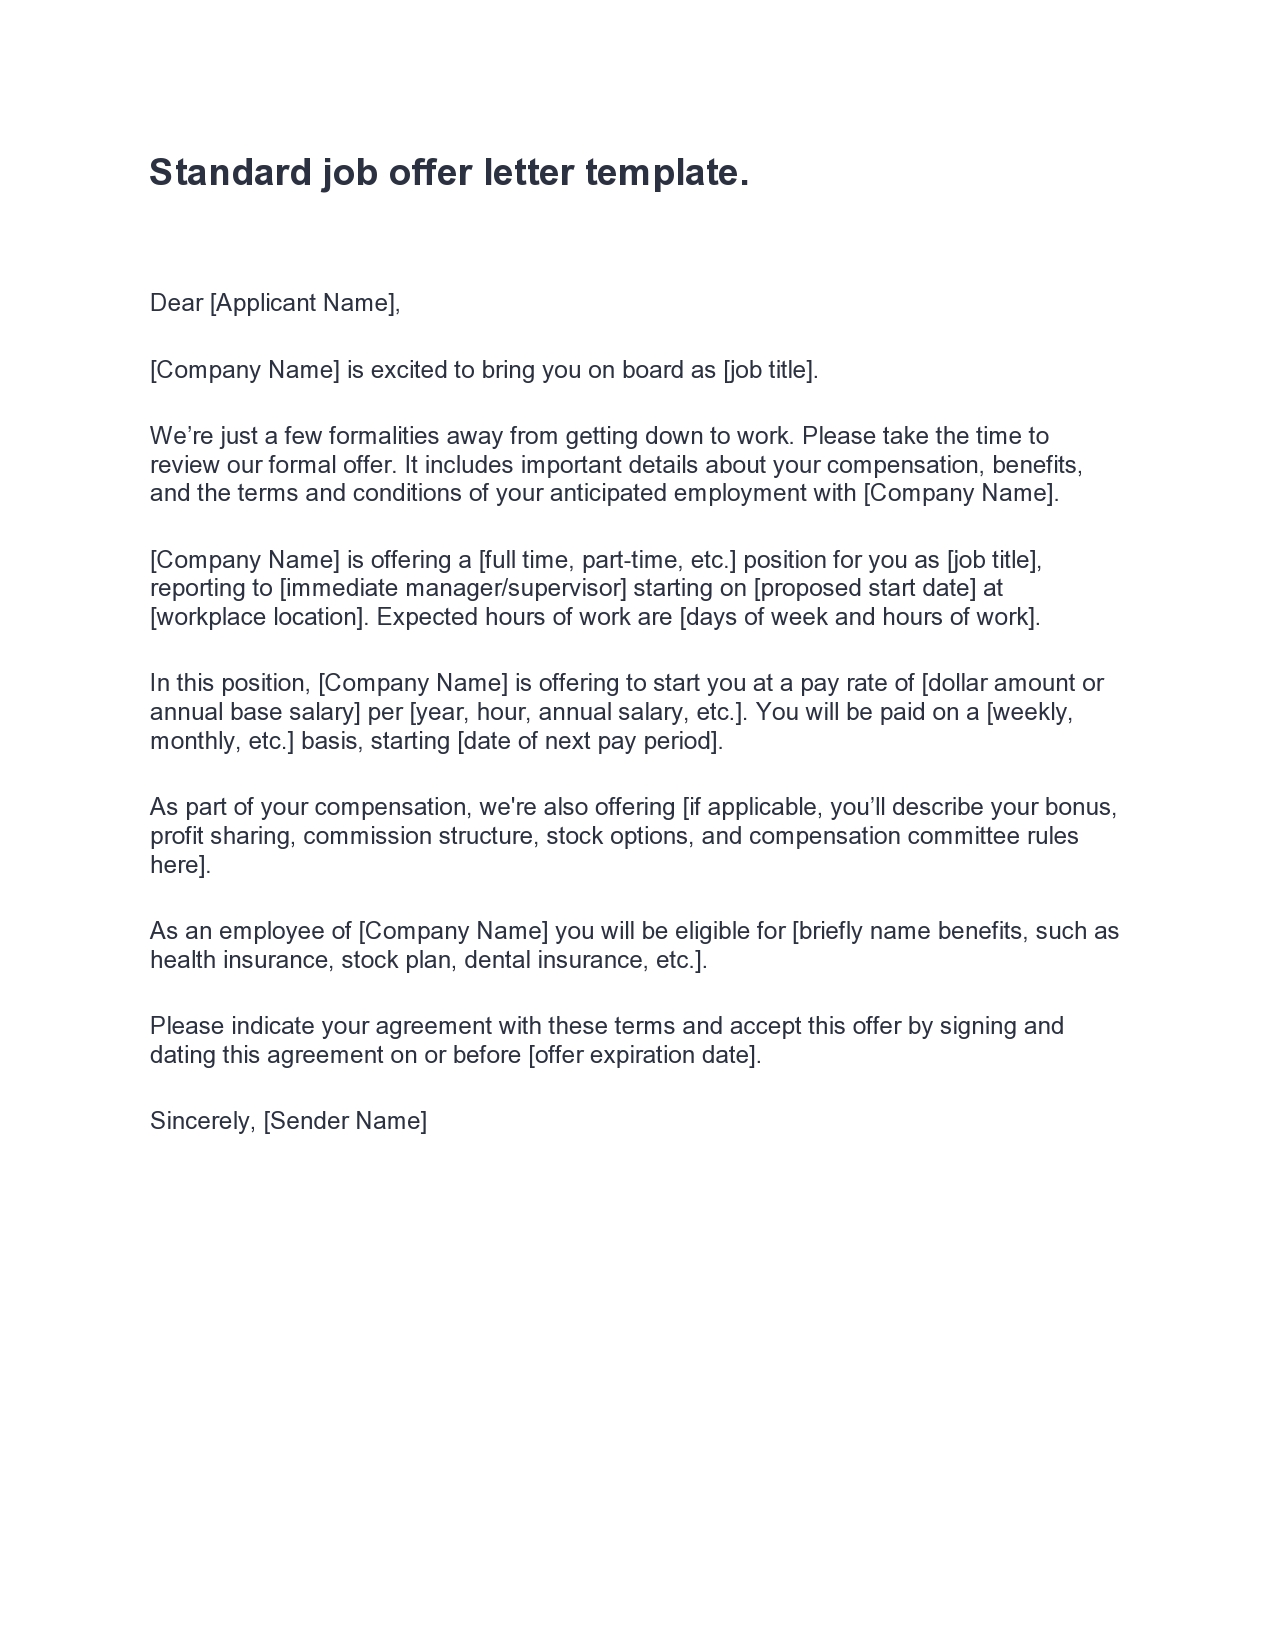 Free employment offer letter template 06